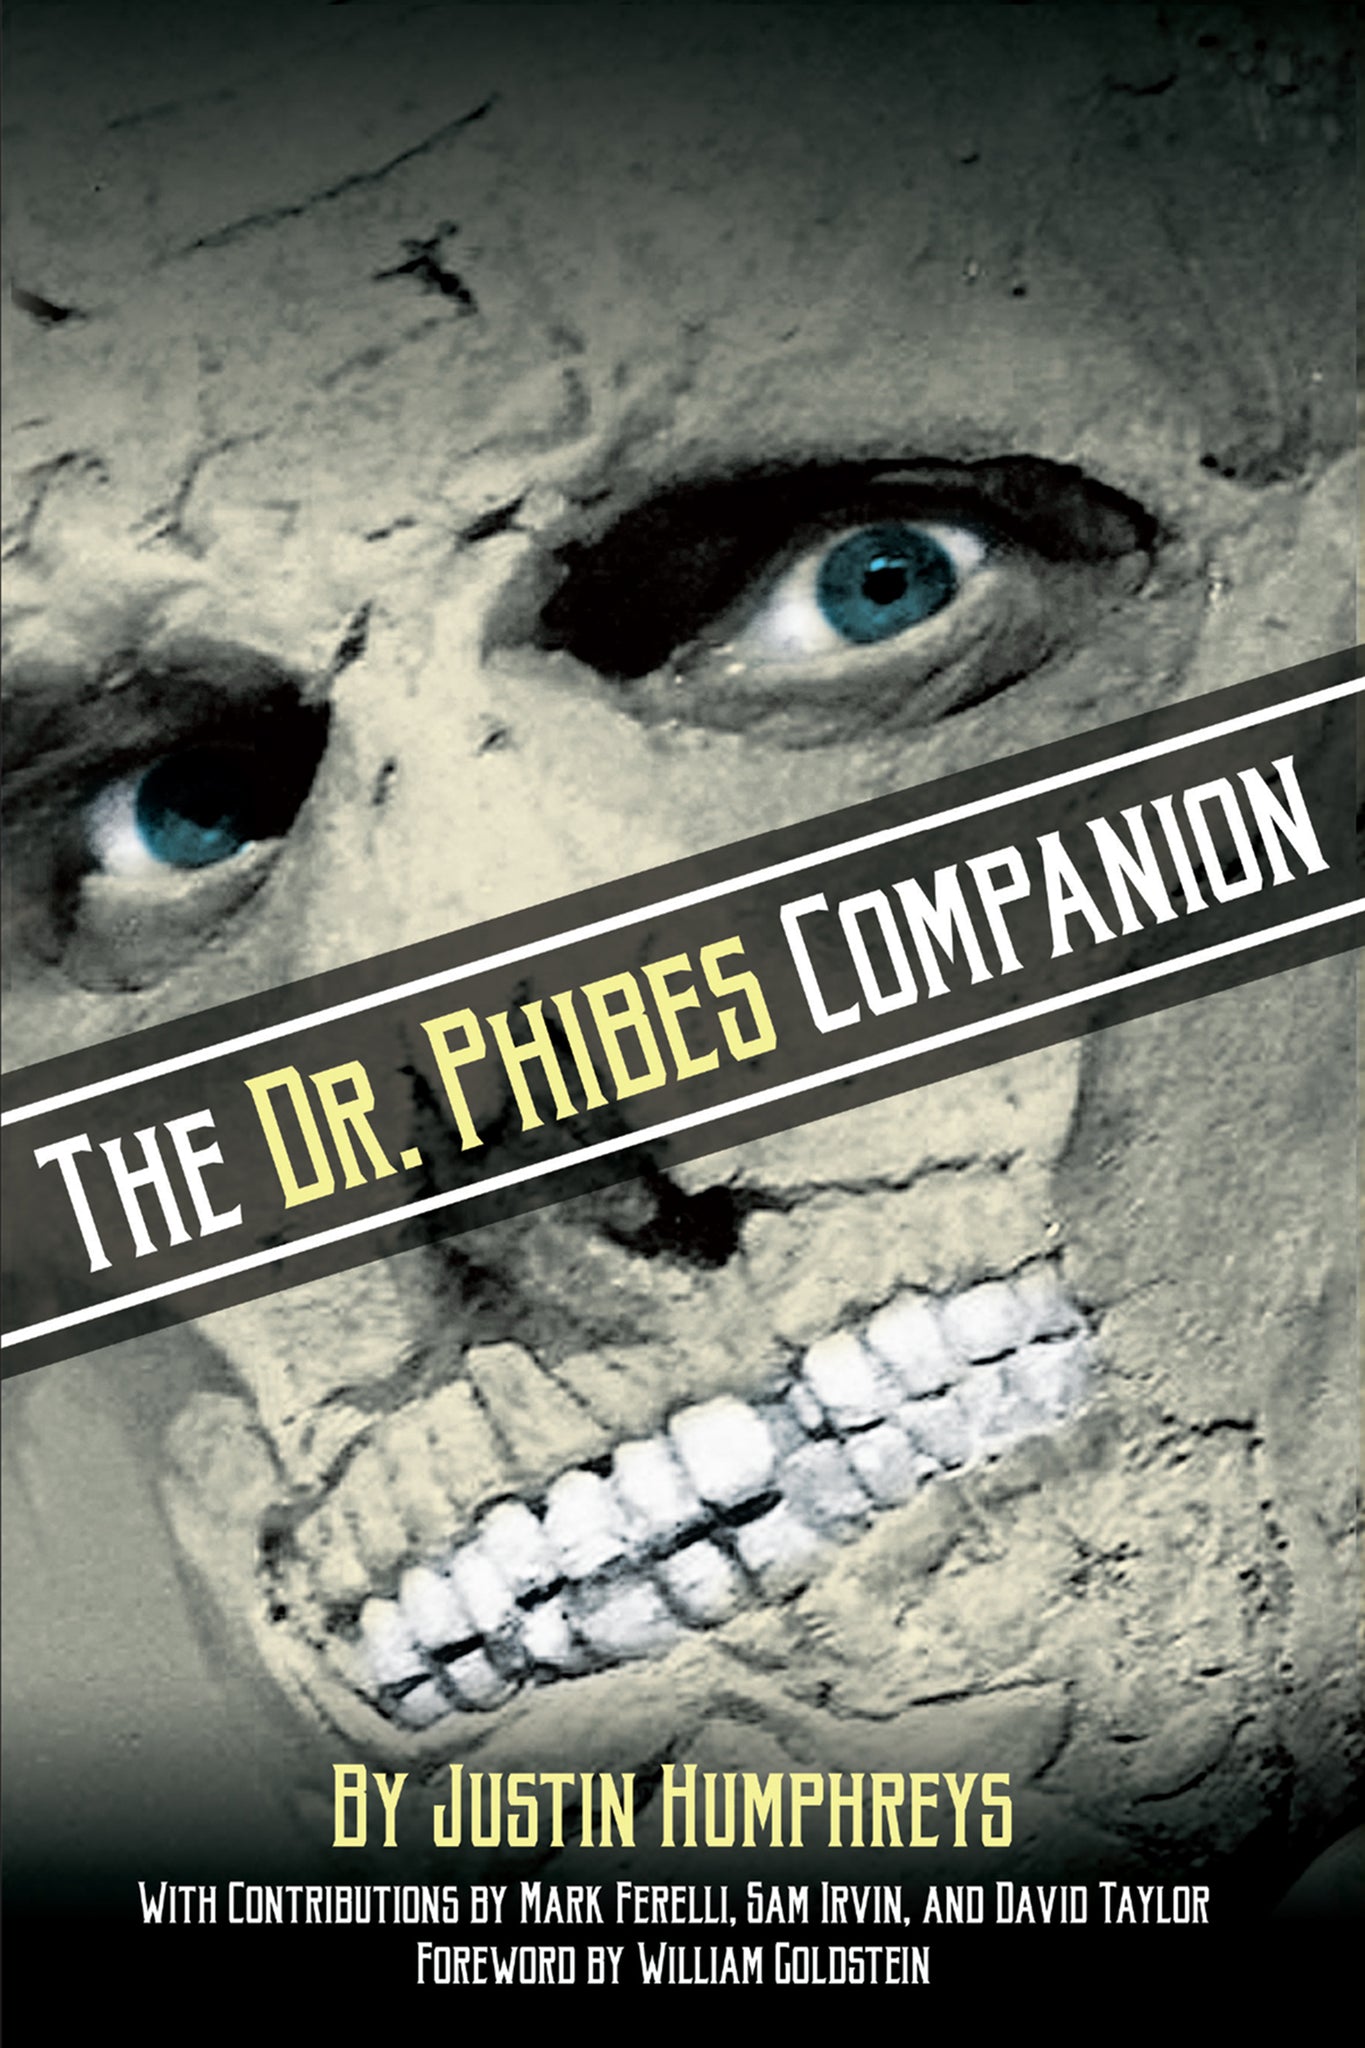 The Dr. Phibes Companion: The Morbidly Romantic History of the Classic Vincent Price Horror Film Series (ebook) - BearManor Manor